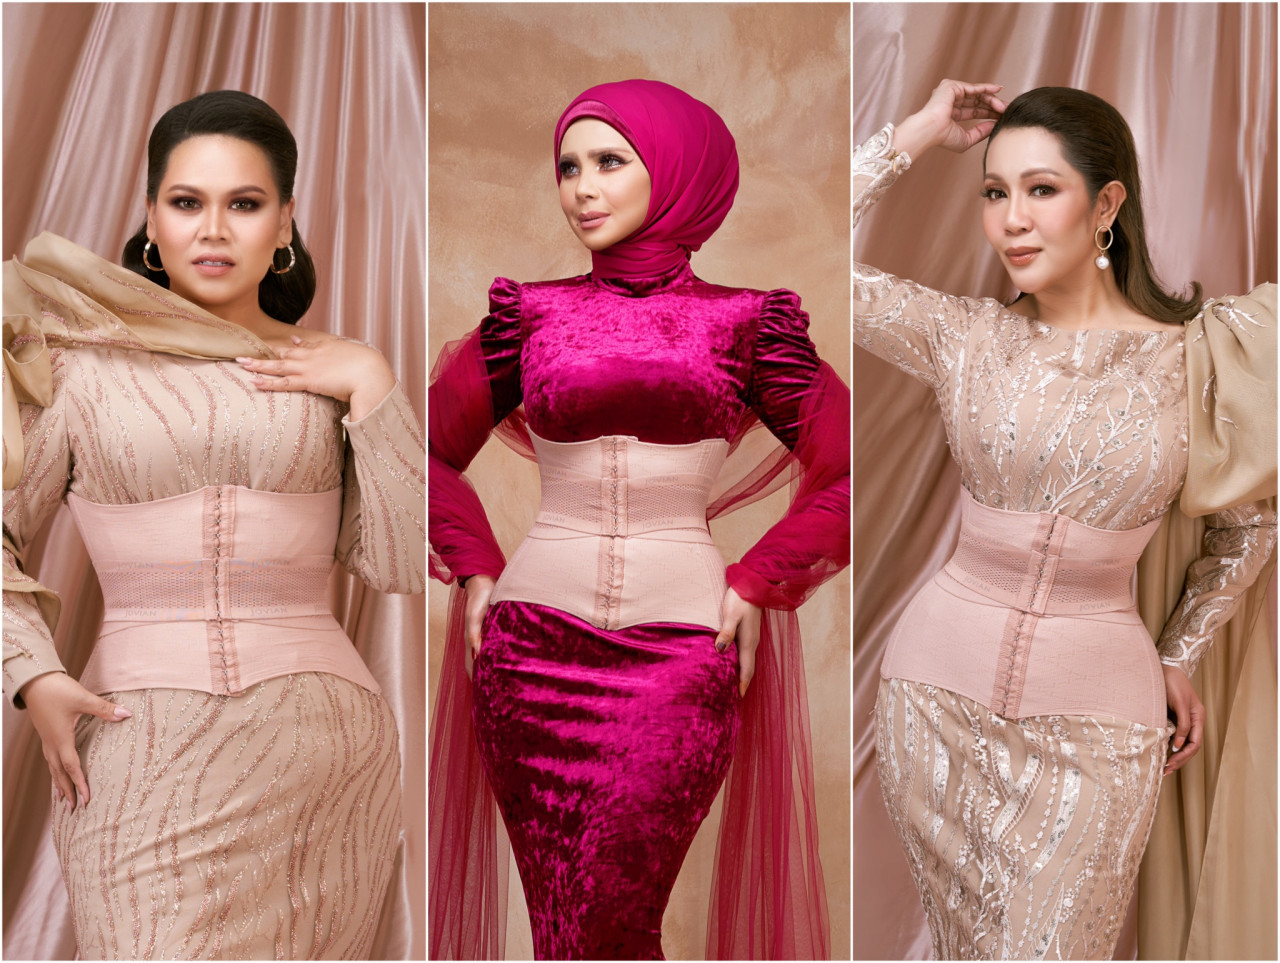 Wonder Suit brings together local celebrities Ifa Raziah, Rozita Che Wan and Sherry Al Hadad aside from Ning Baizura and girl group Dolla as the faces for its waist trainer. – Pic courtesy of Wonder Suit